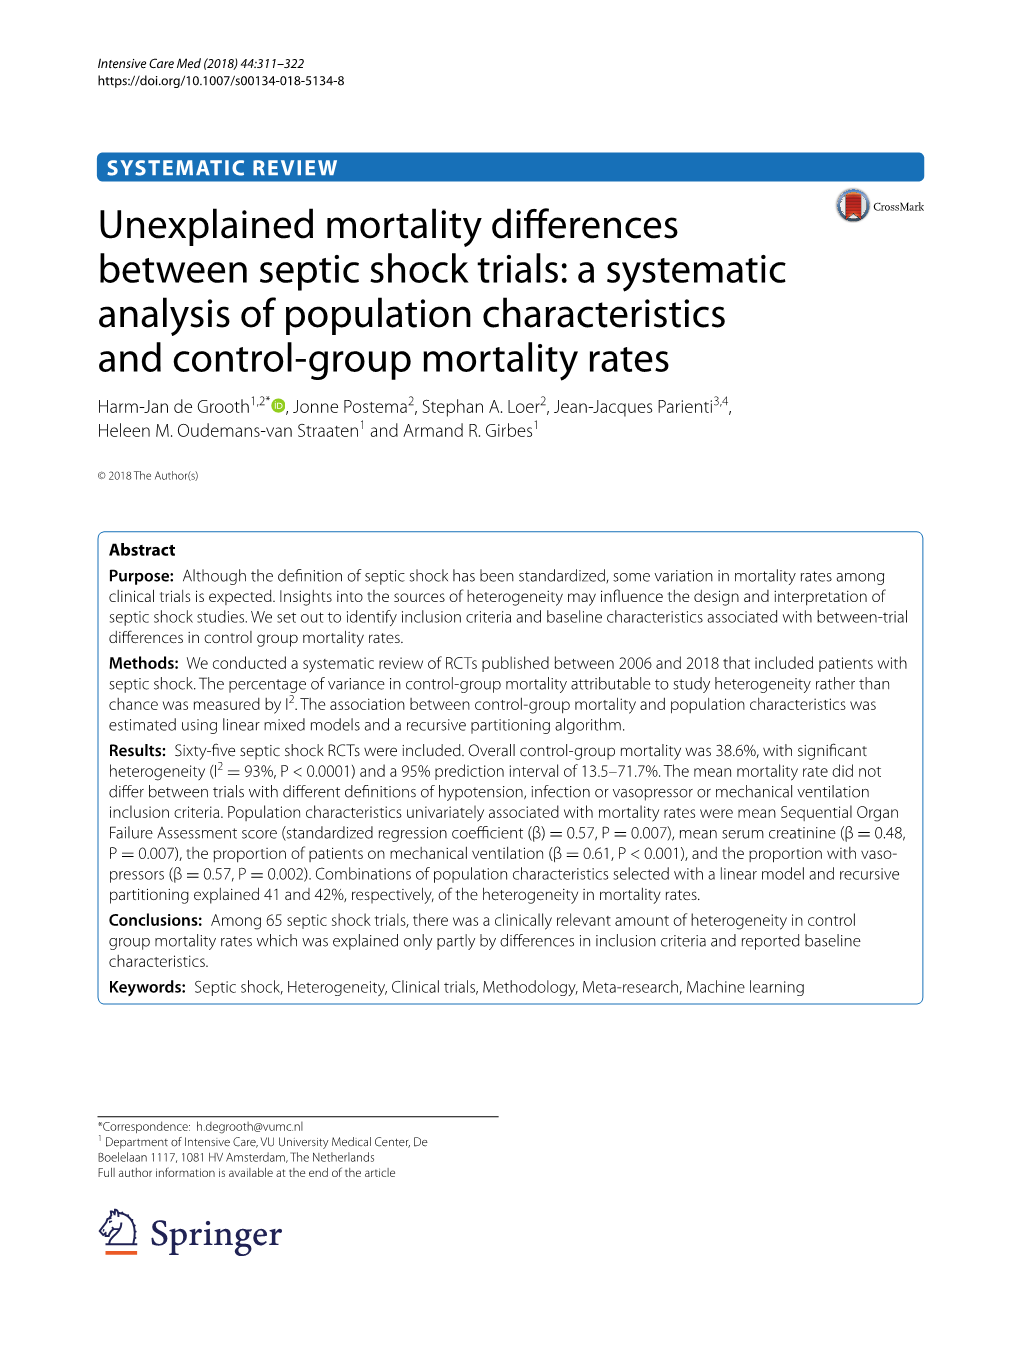 Unexplained Mortality Differences Between Septic Shock Trials: a Systematic Analysis of Population Characteristics and Control-G